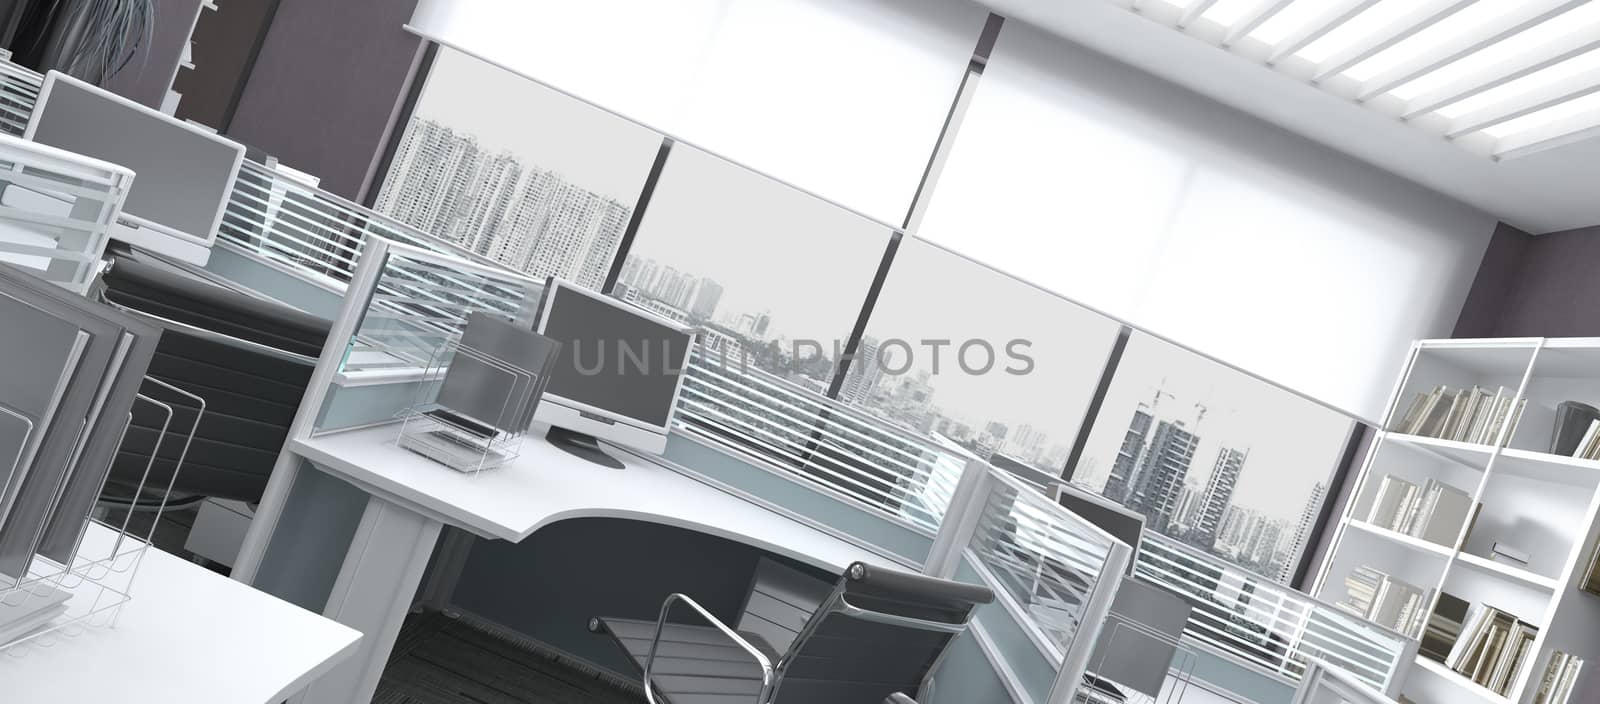 Photorealistic 3d render of a office